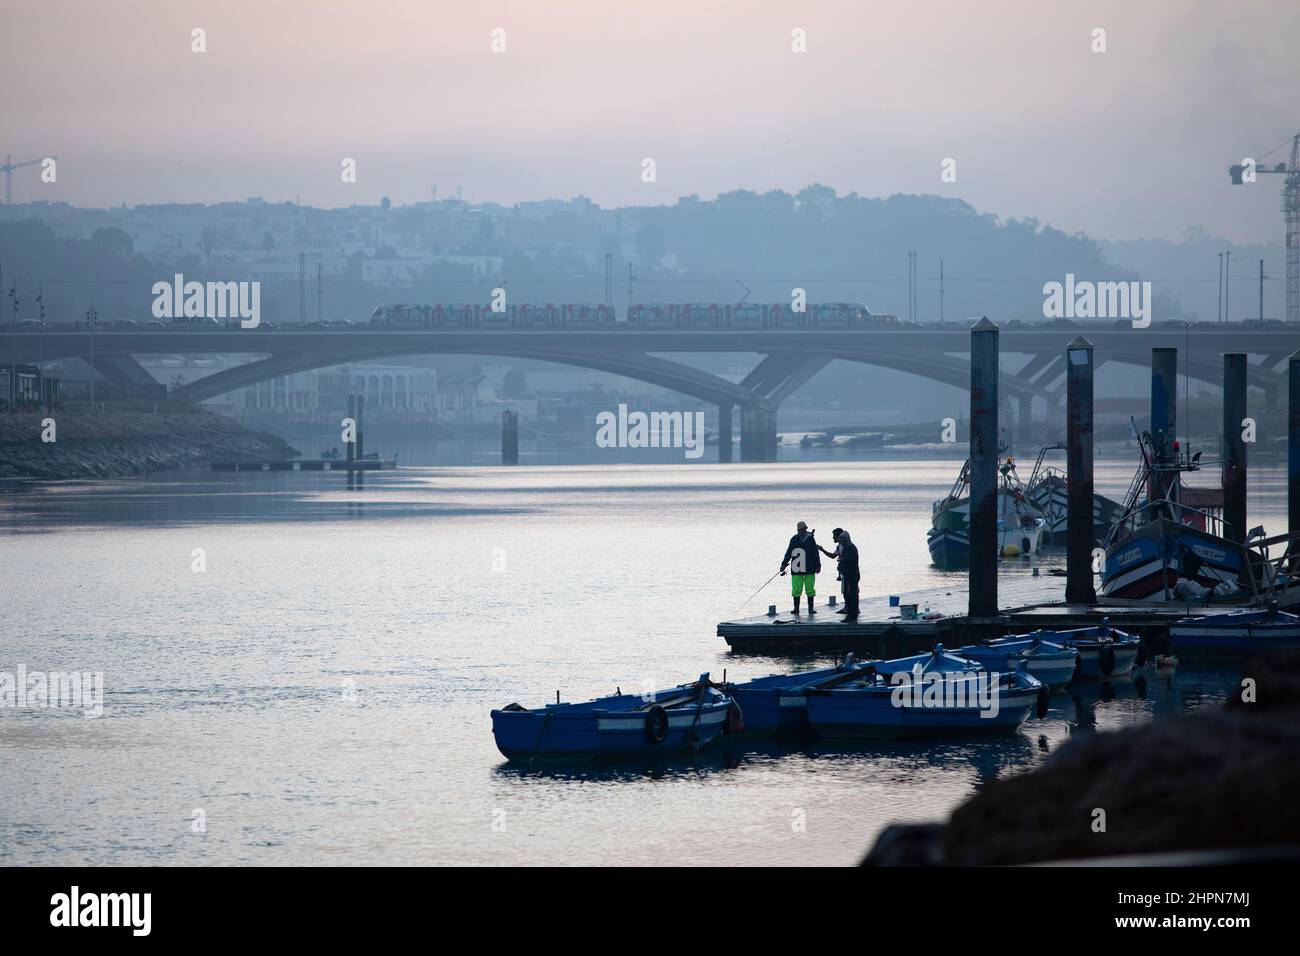 The Hassan II bridge over the Bou Regreg river connects Salé and Rabat in Morocco. Stock Photo